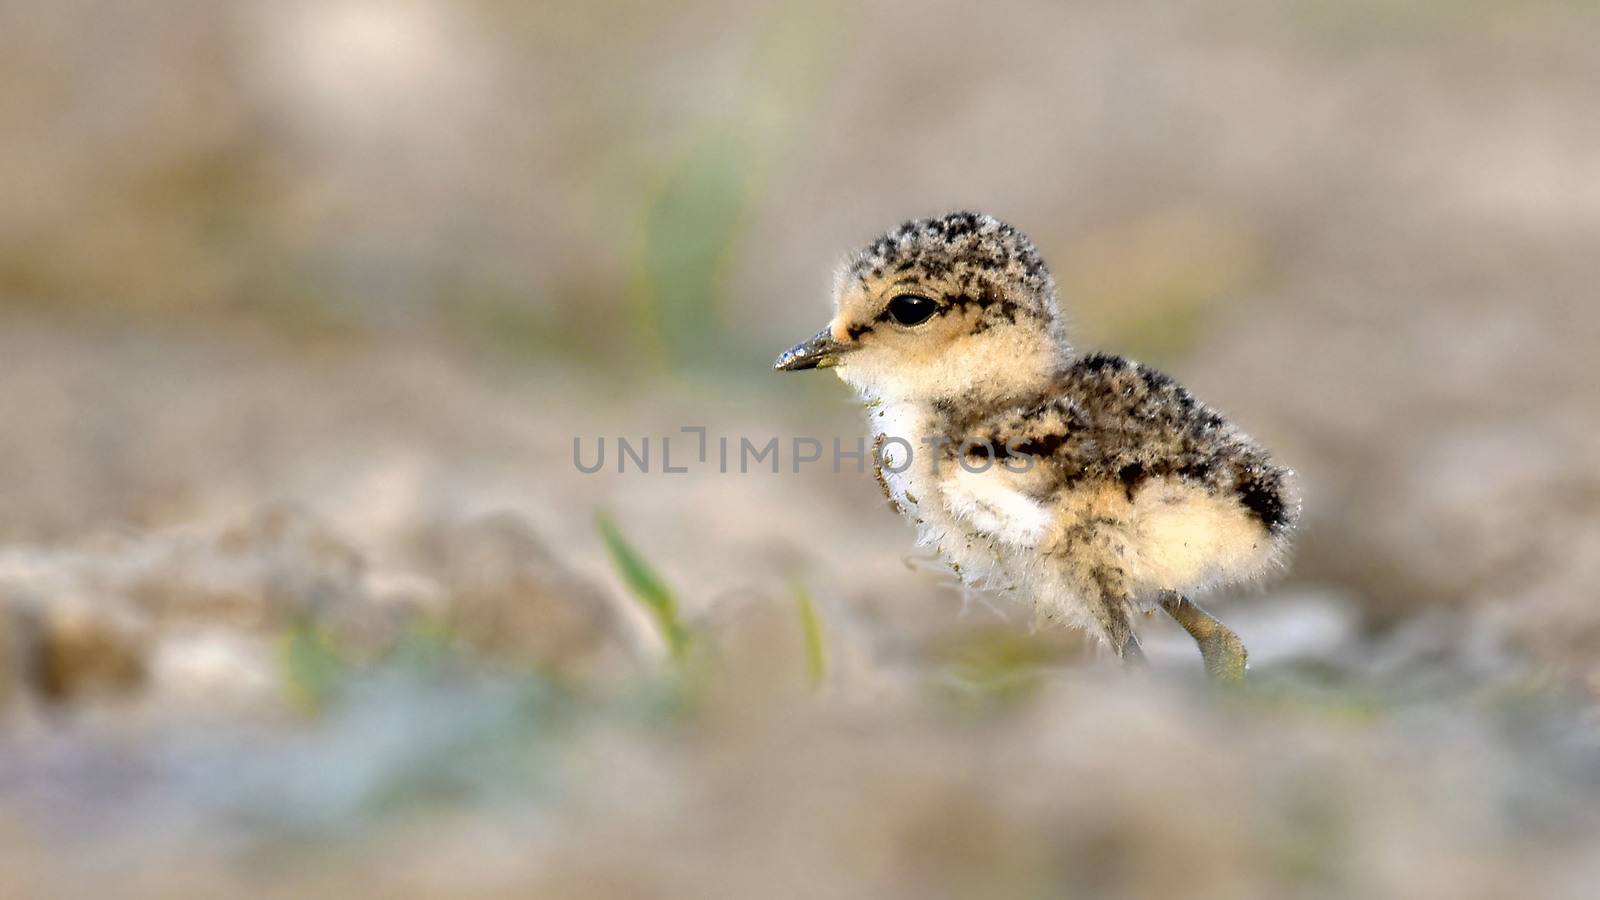 The Kentish plover is a small cosmopolitan shorebird of the family Charadriidae that breeds on the shores of saline lakes, lagoons, and coasts, populating sand dunes, marshes, semi-arid desert, and tundra.